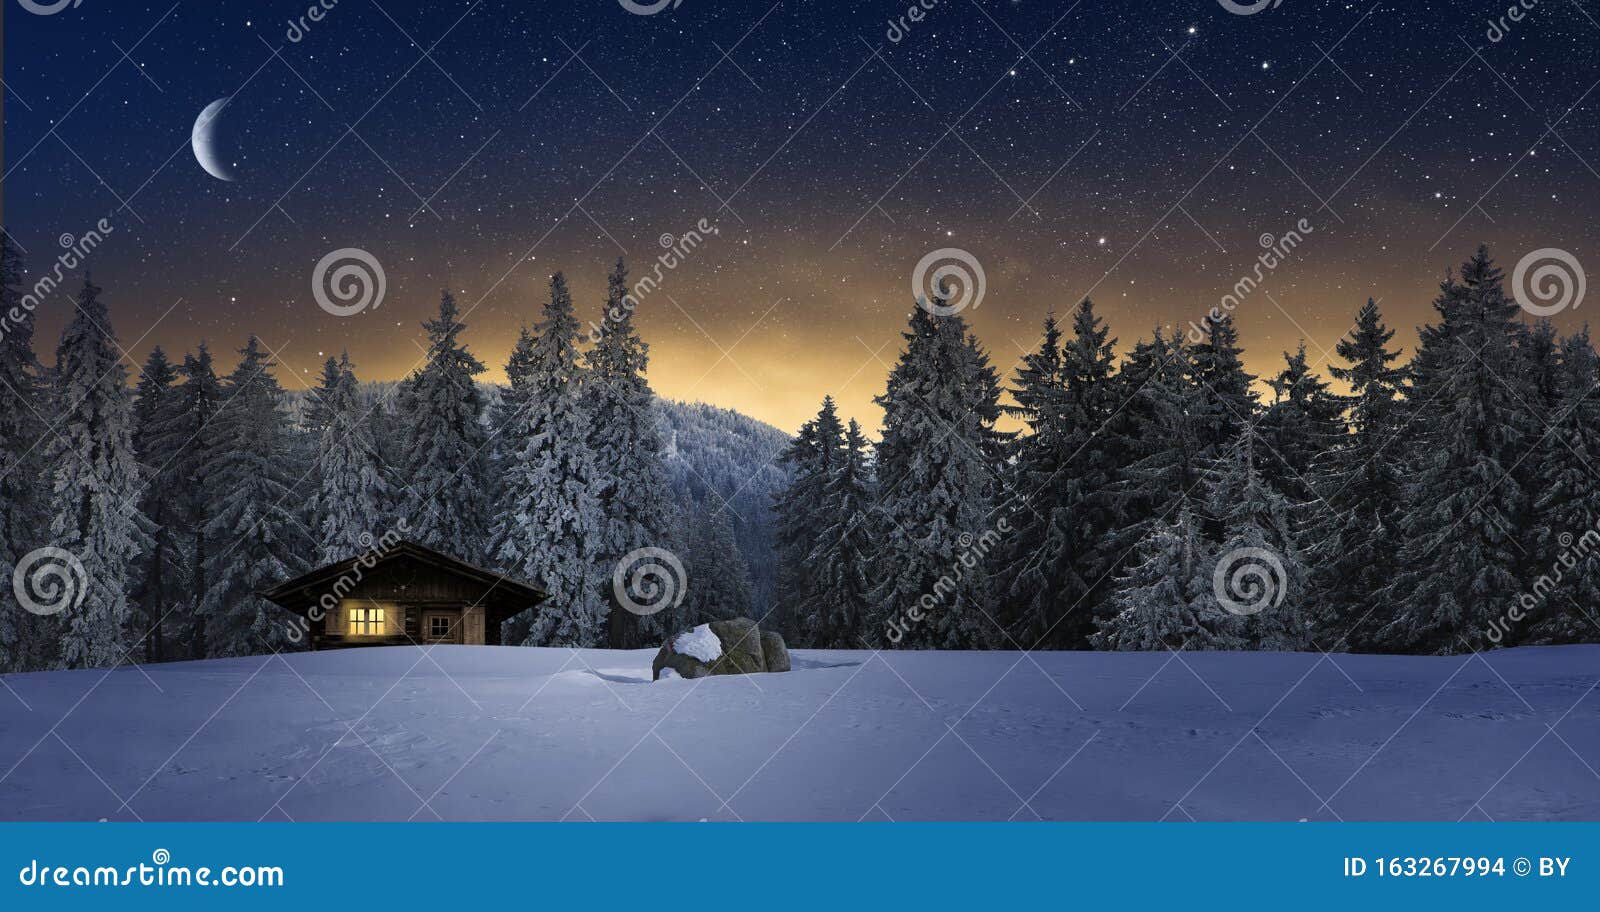 cozy cottage in wintertime at night